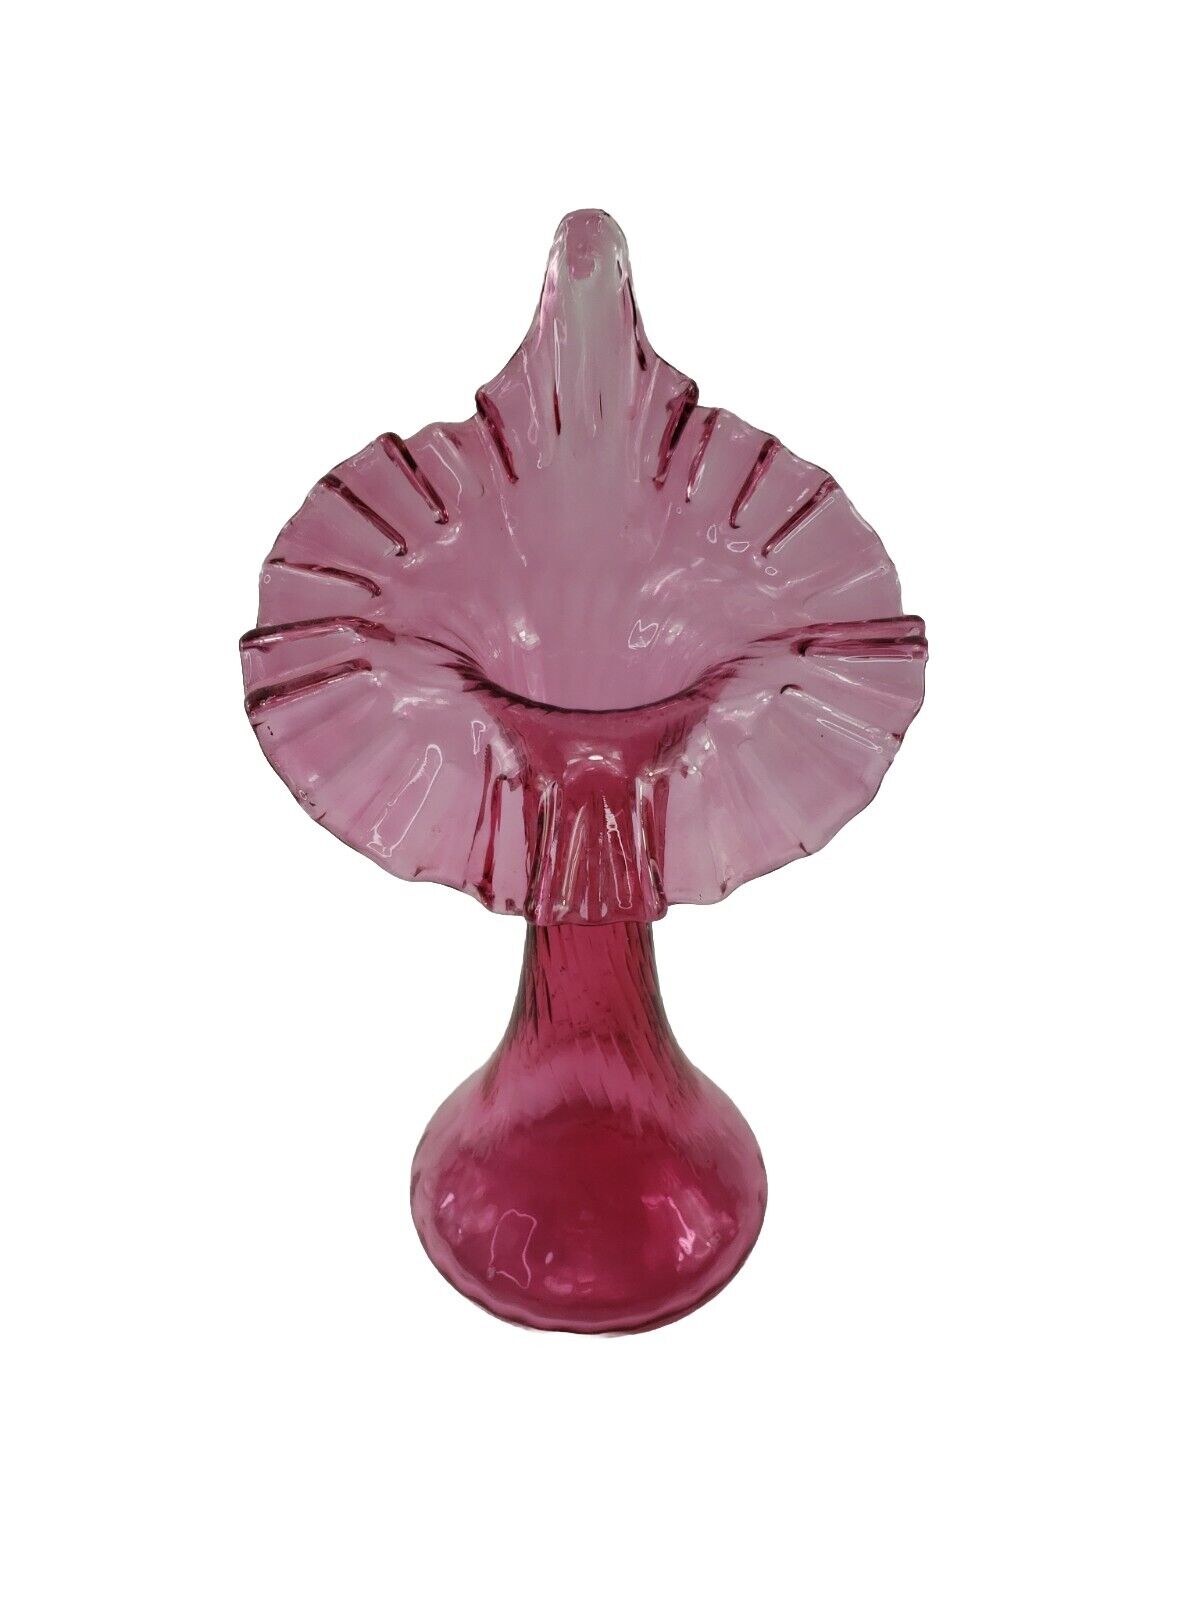 1989 Fenton Glass Cranberry Coin Dot Jack in the Pulpit Tulip Vase 